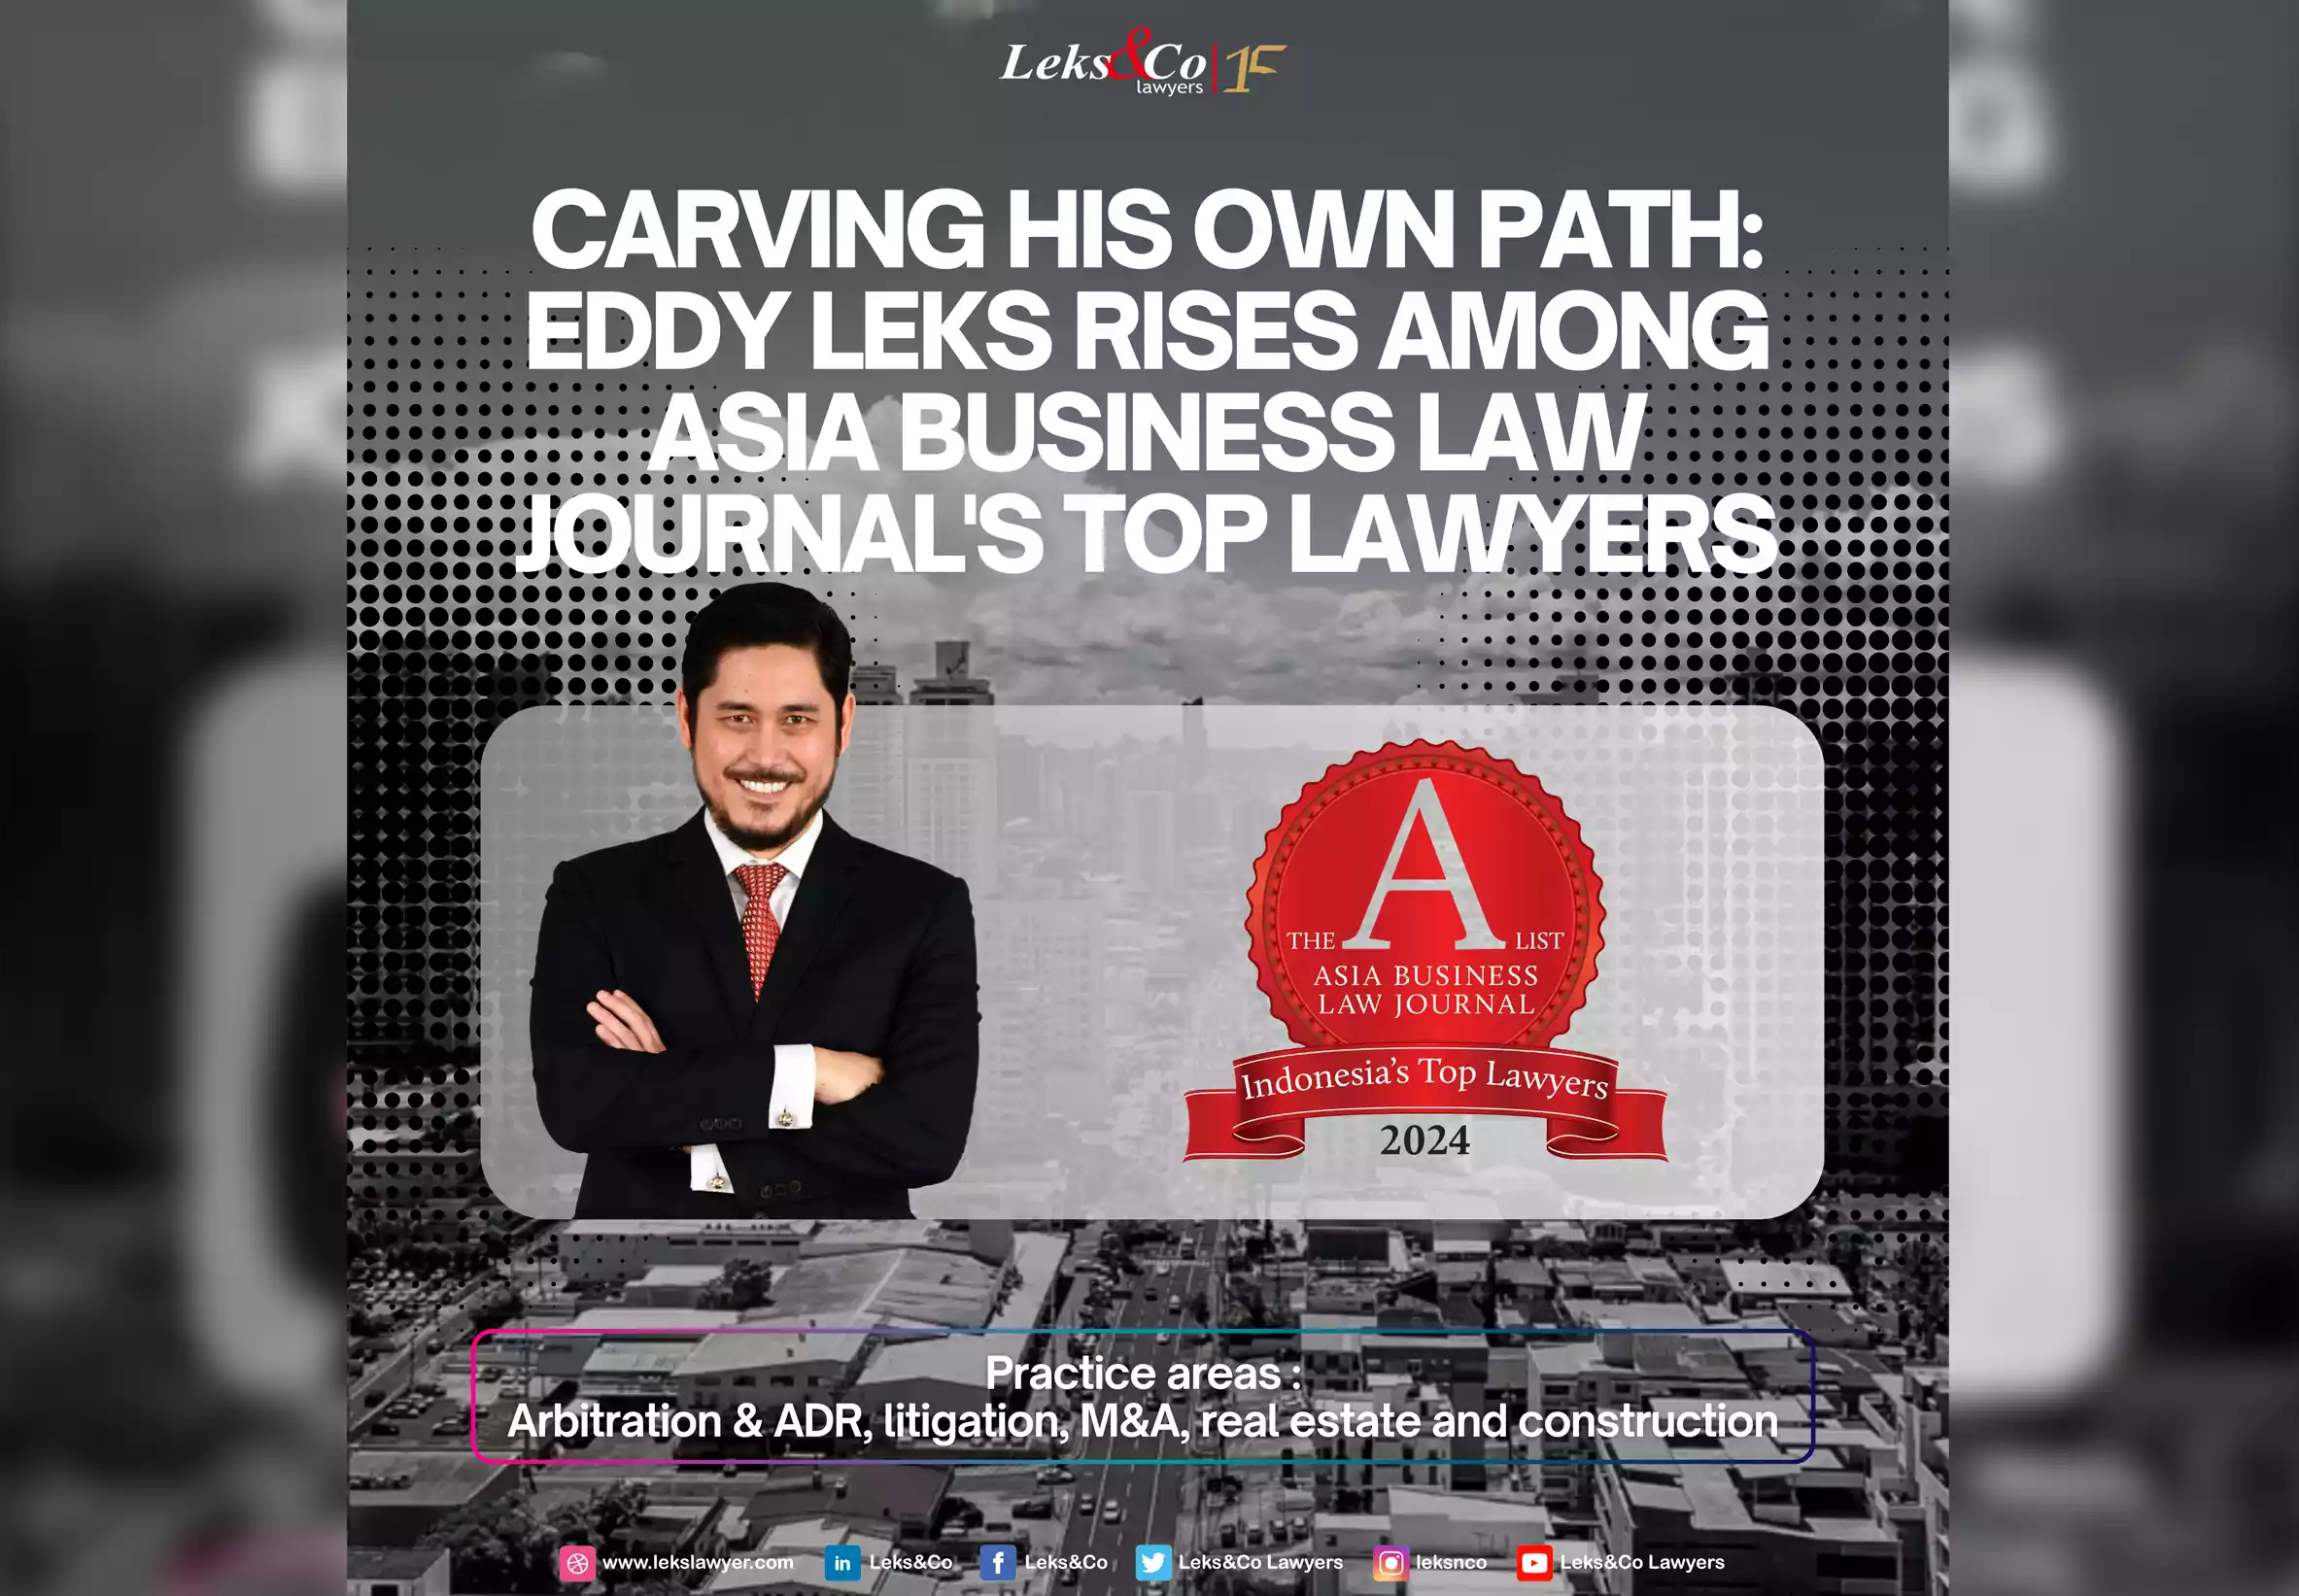 Carving His Own Path: Eddy Leks Rises Among Asia Business Law Journal’s Top Lawyers